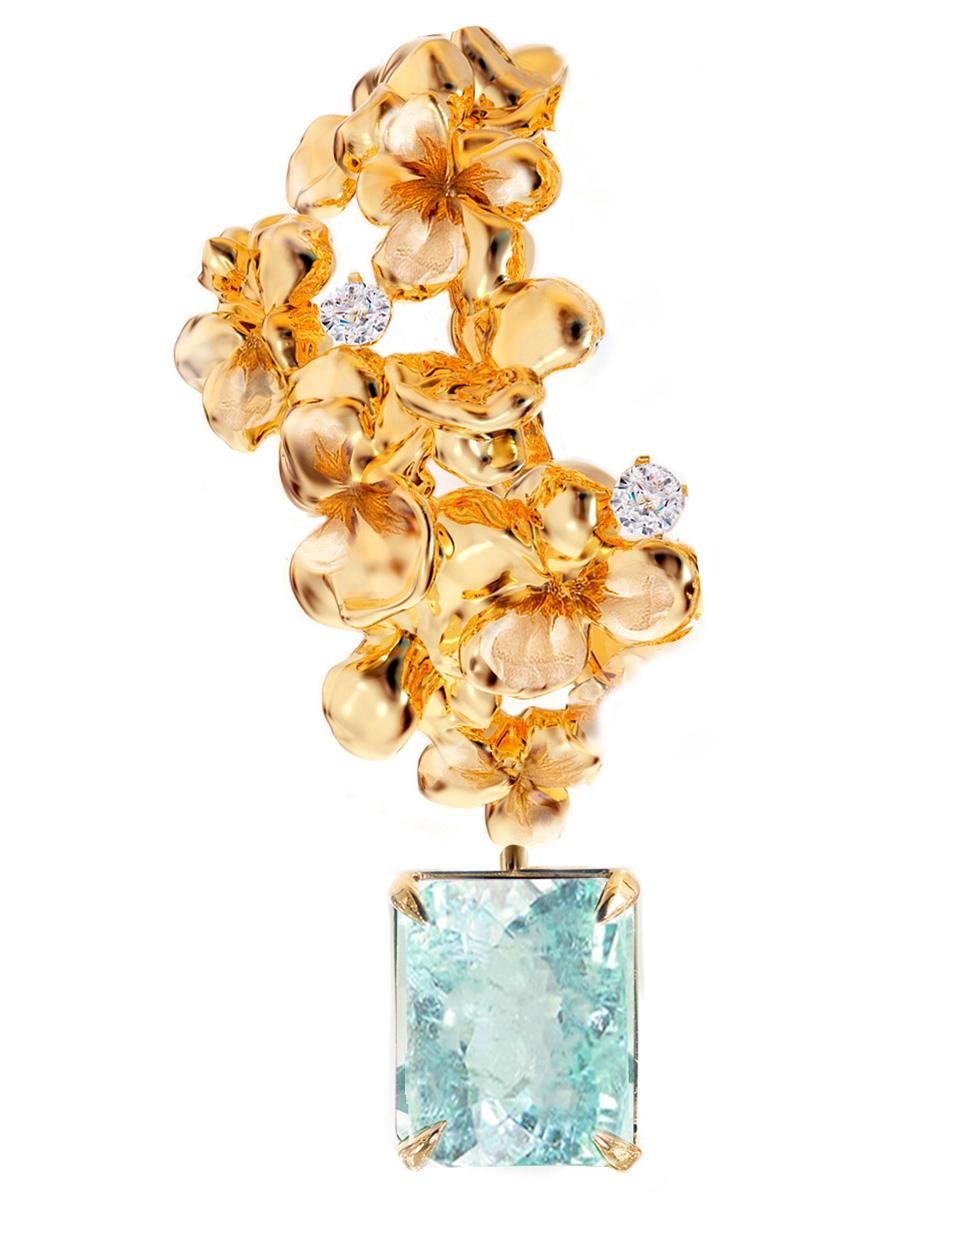 These contemporary 18 karat yellow gold Hortensia cocktail clip-on earrings are encrusted with round diamonds and detachable paraiba tourmalines. This jewellery collection was featured in Vogue UA review.
One earring is around 4 cm long. We use top